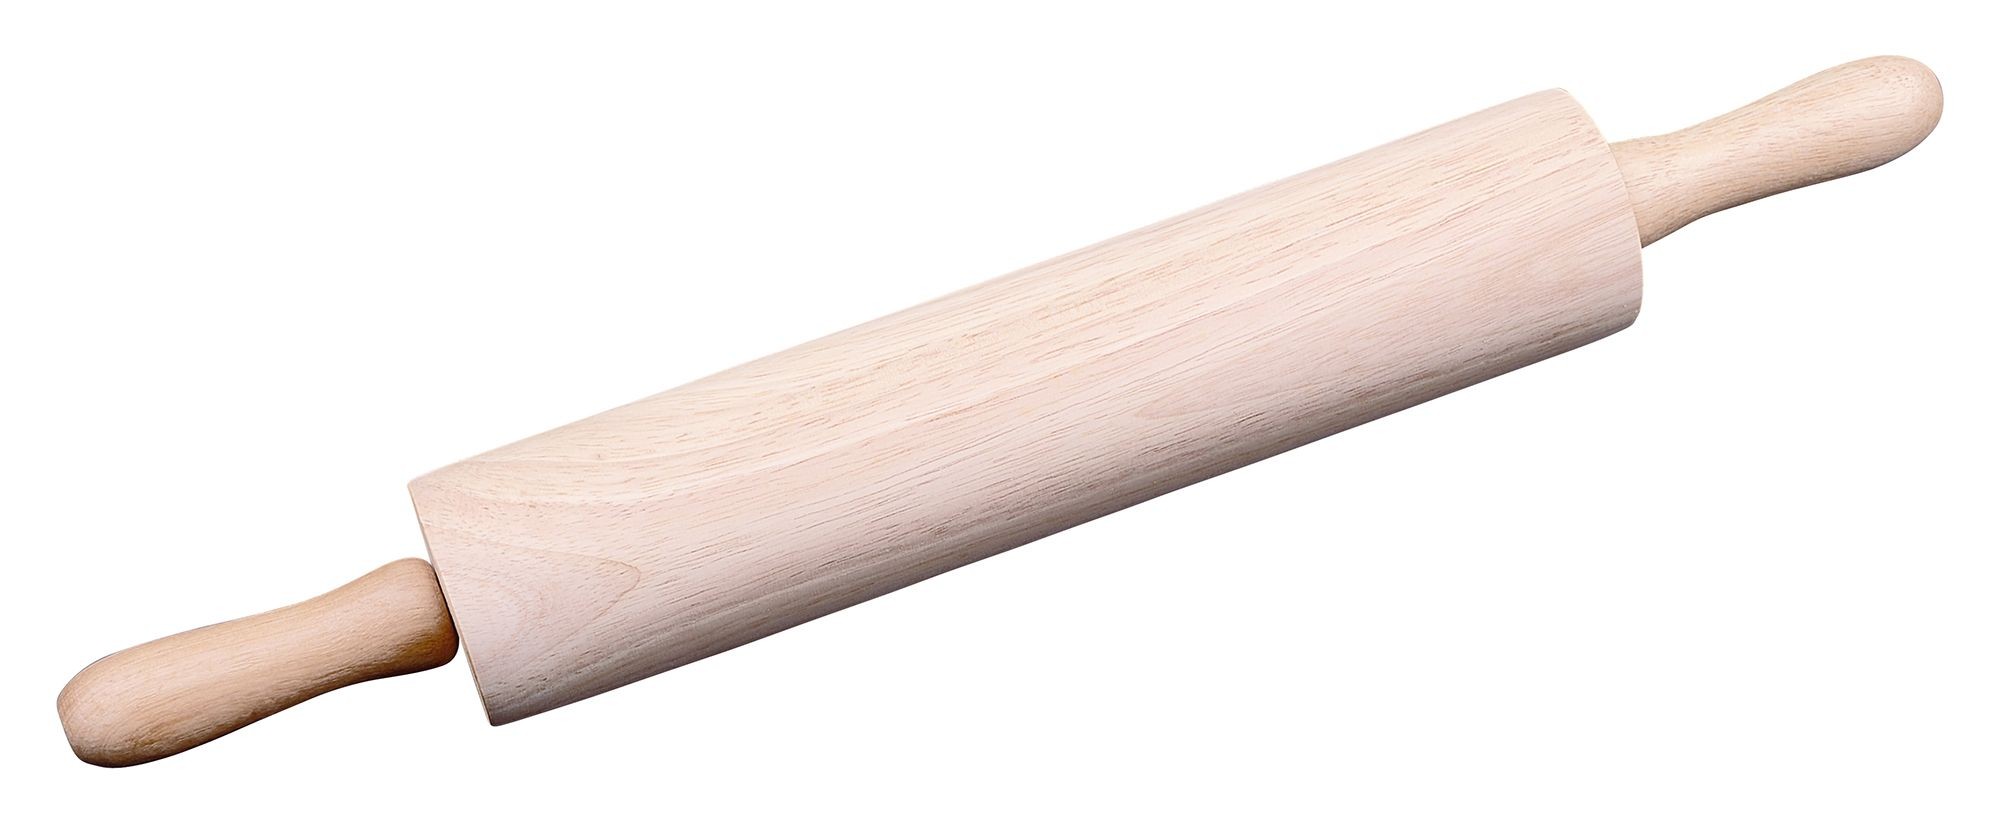 Wooden Rolling Pin 13" Premium Quality New 